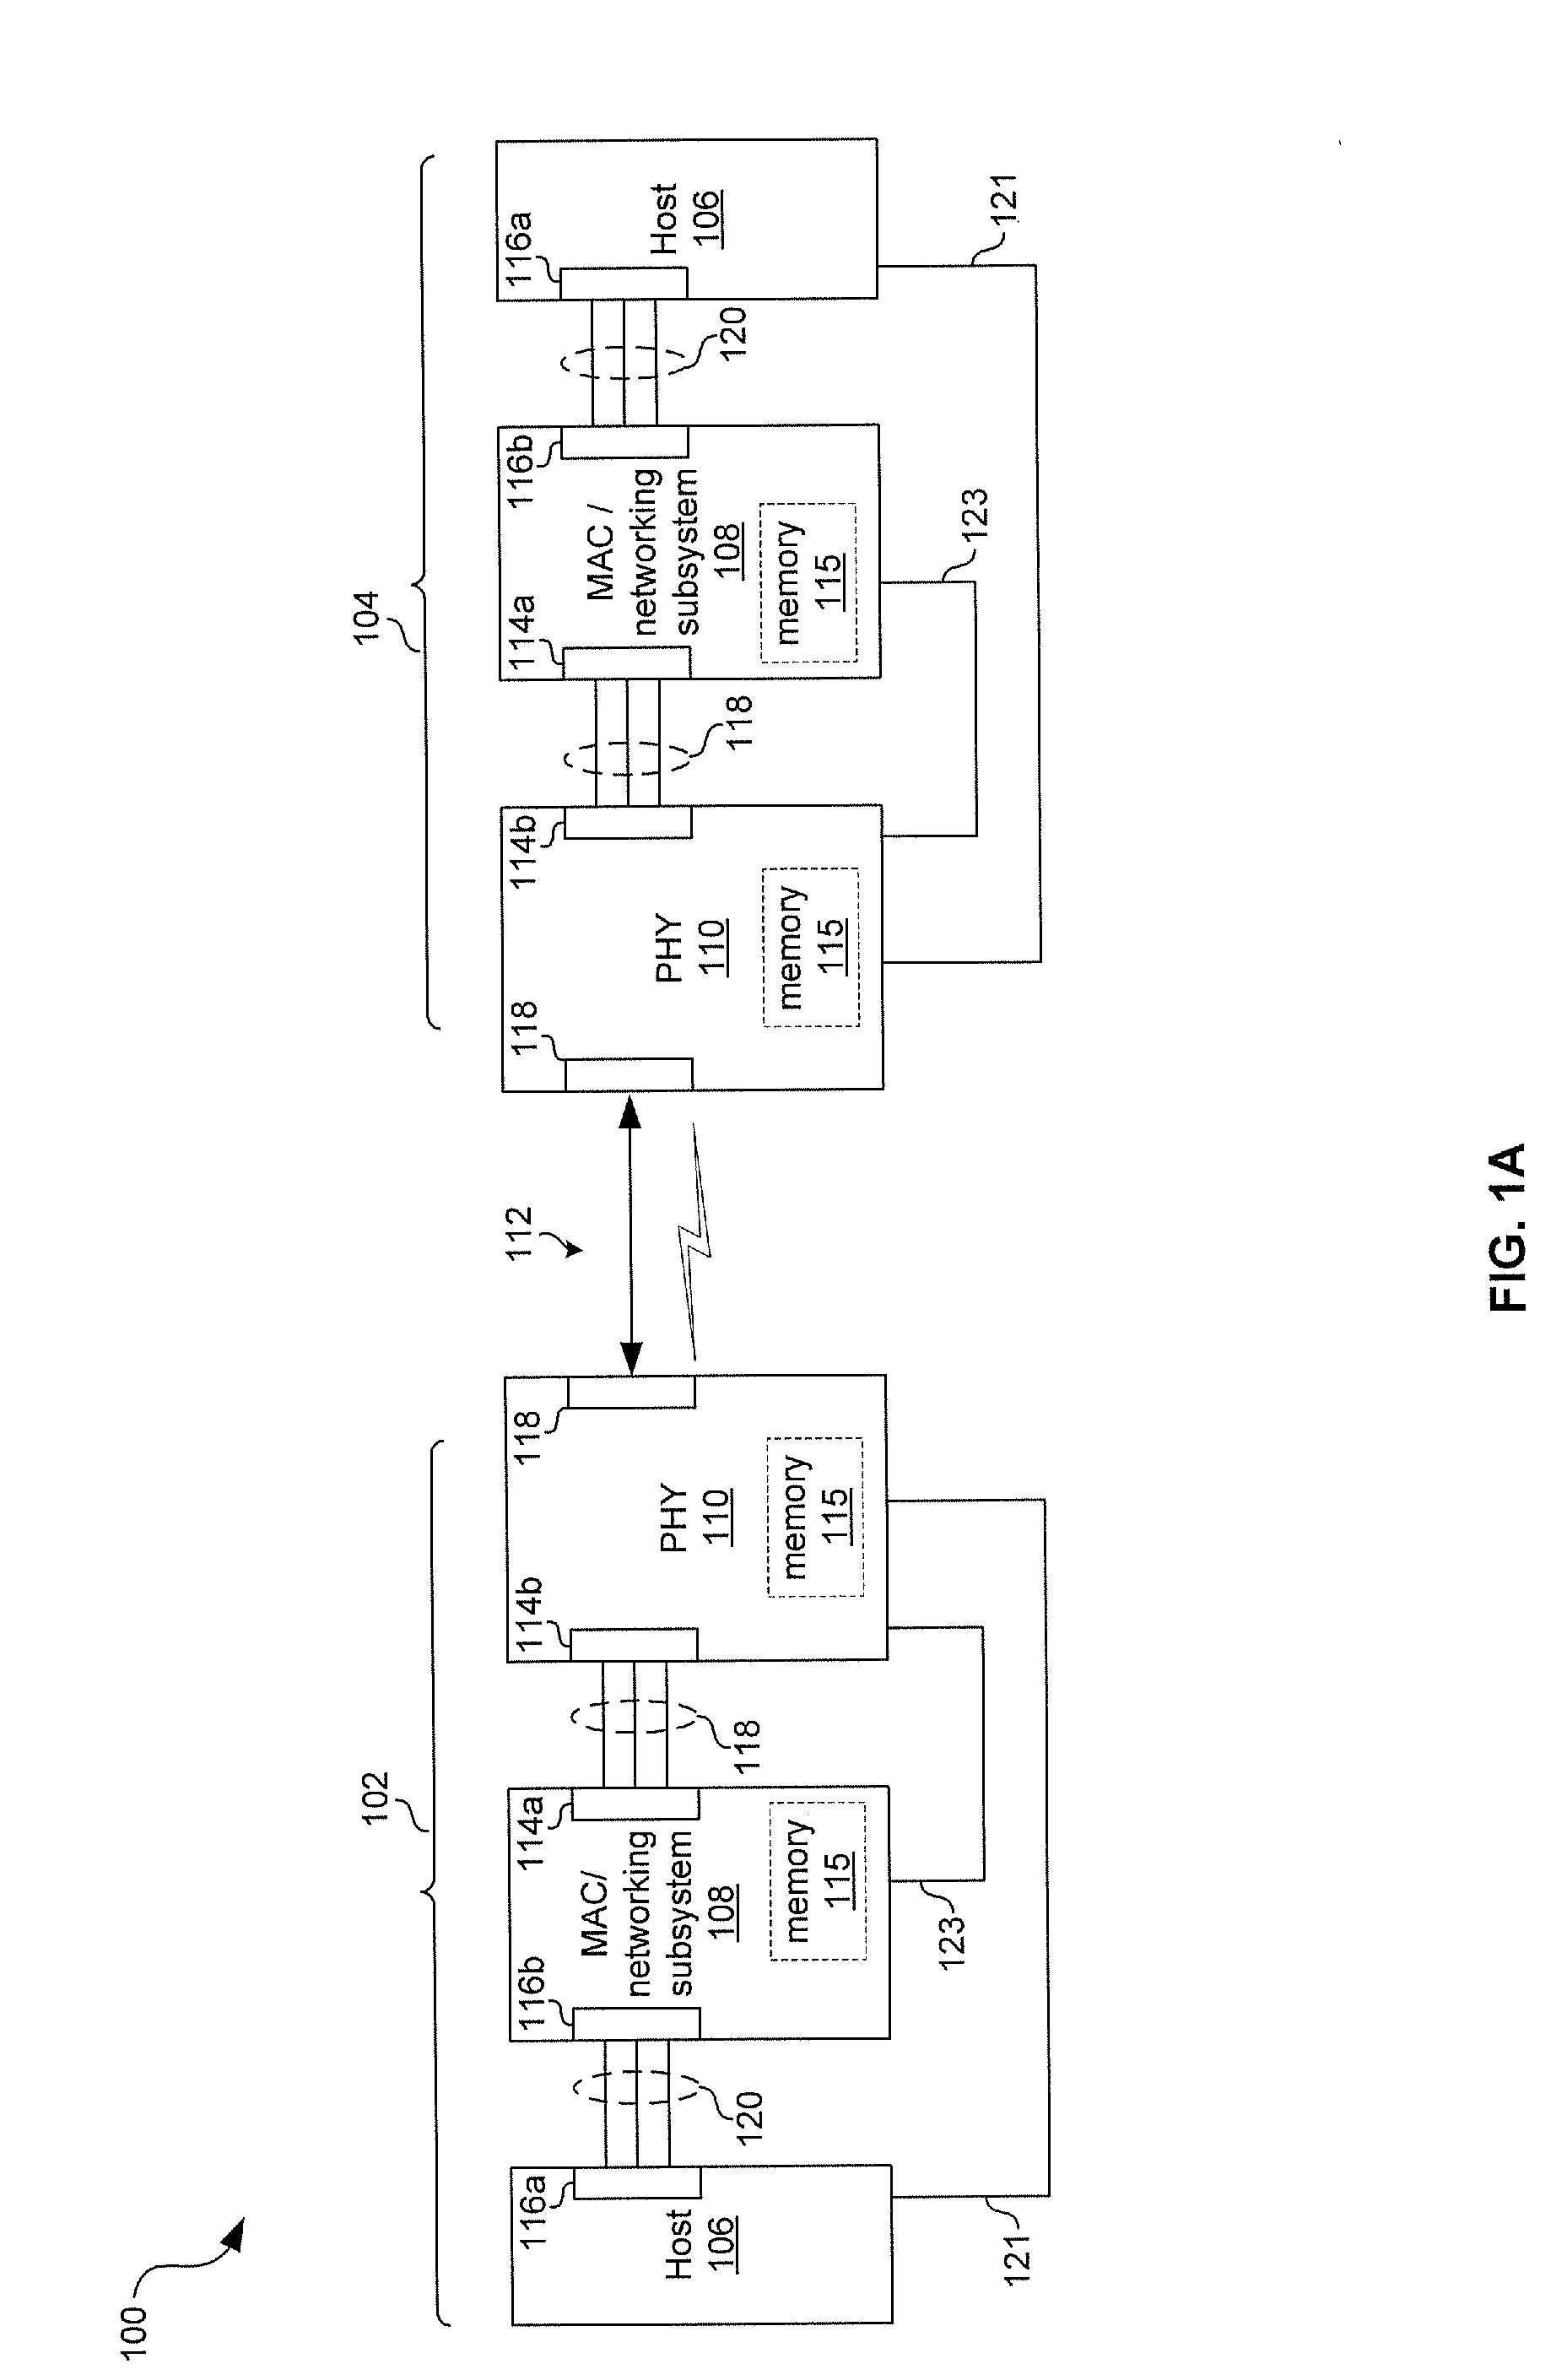 Method and system for compensated time stamping for time-sensitive network communications